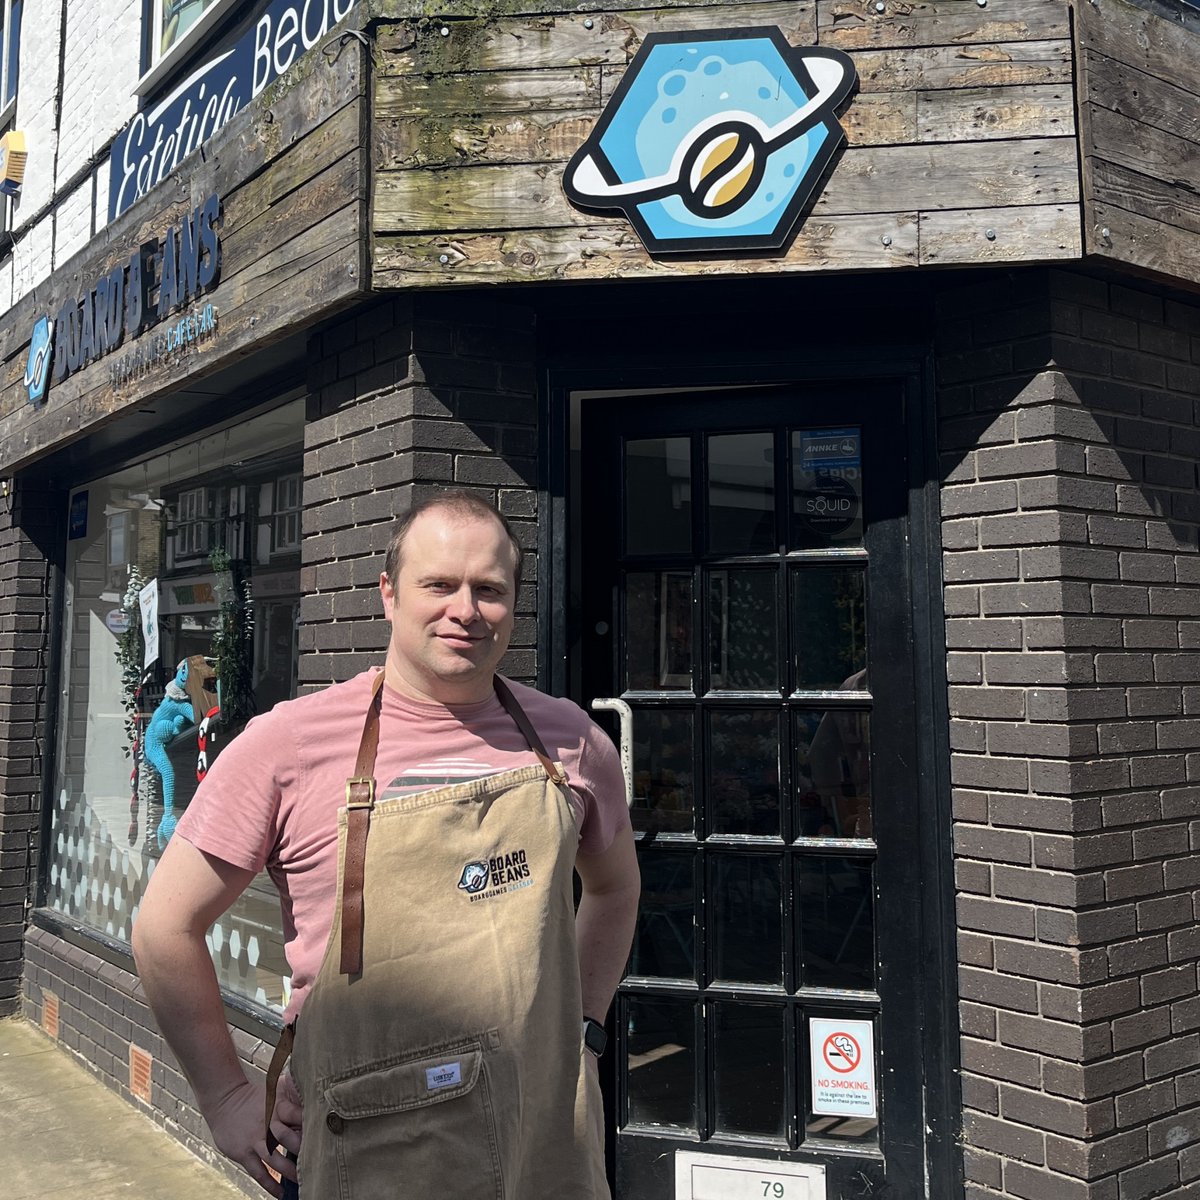 HAPPY 5th BIRTHDAY to Board Beans Cafe!🎂 Frazer & Betsy are so thankful for all their fabulous customers, you helped them to sweep the leaderboards by voting them best cafe in mid Cheshire and supported them during COVID. 🏆 Here's to another year of game nights 🧩🎲 #Northwich